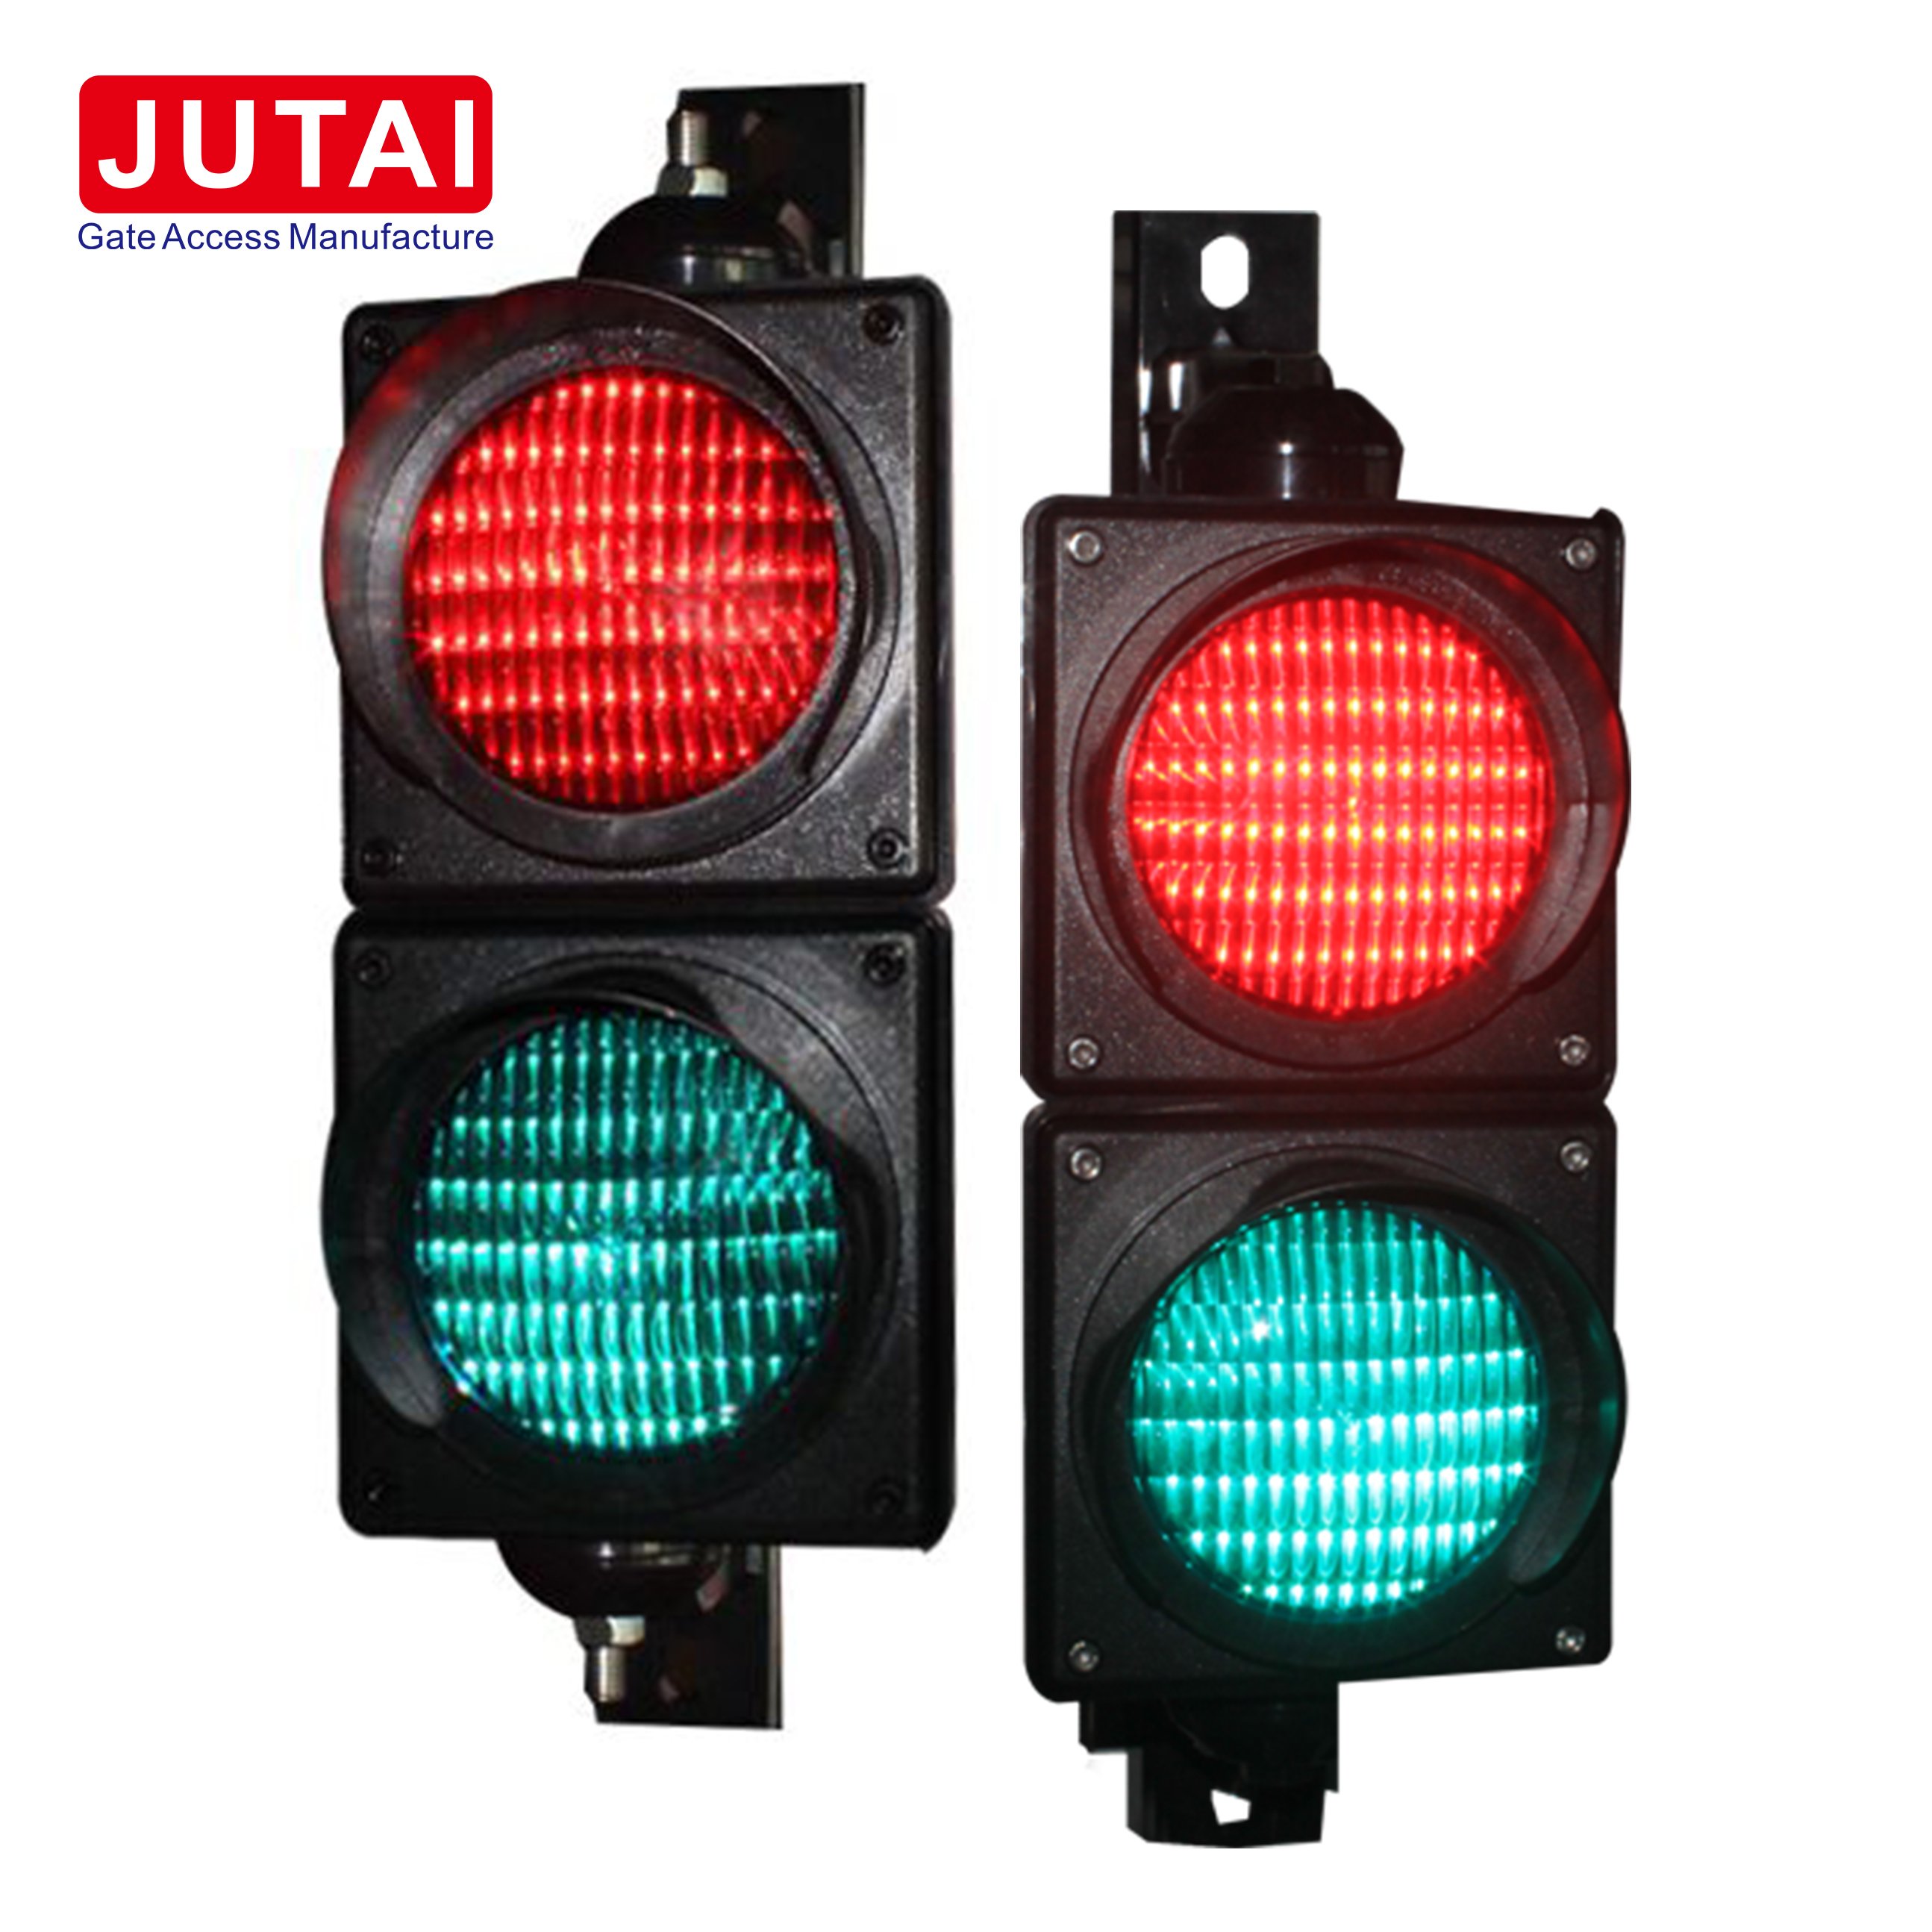 100mm Traffic Light For Parking Lot Vehicle Access Gate Operator Control